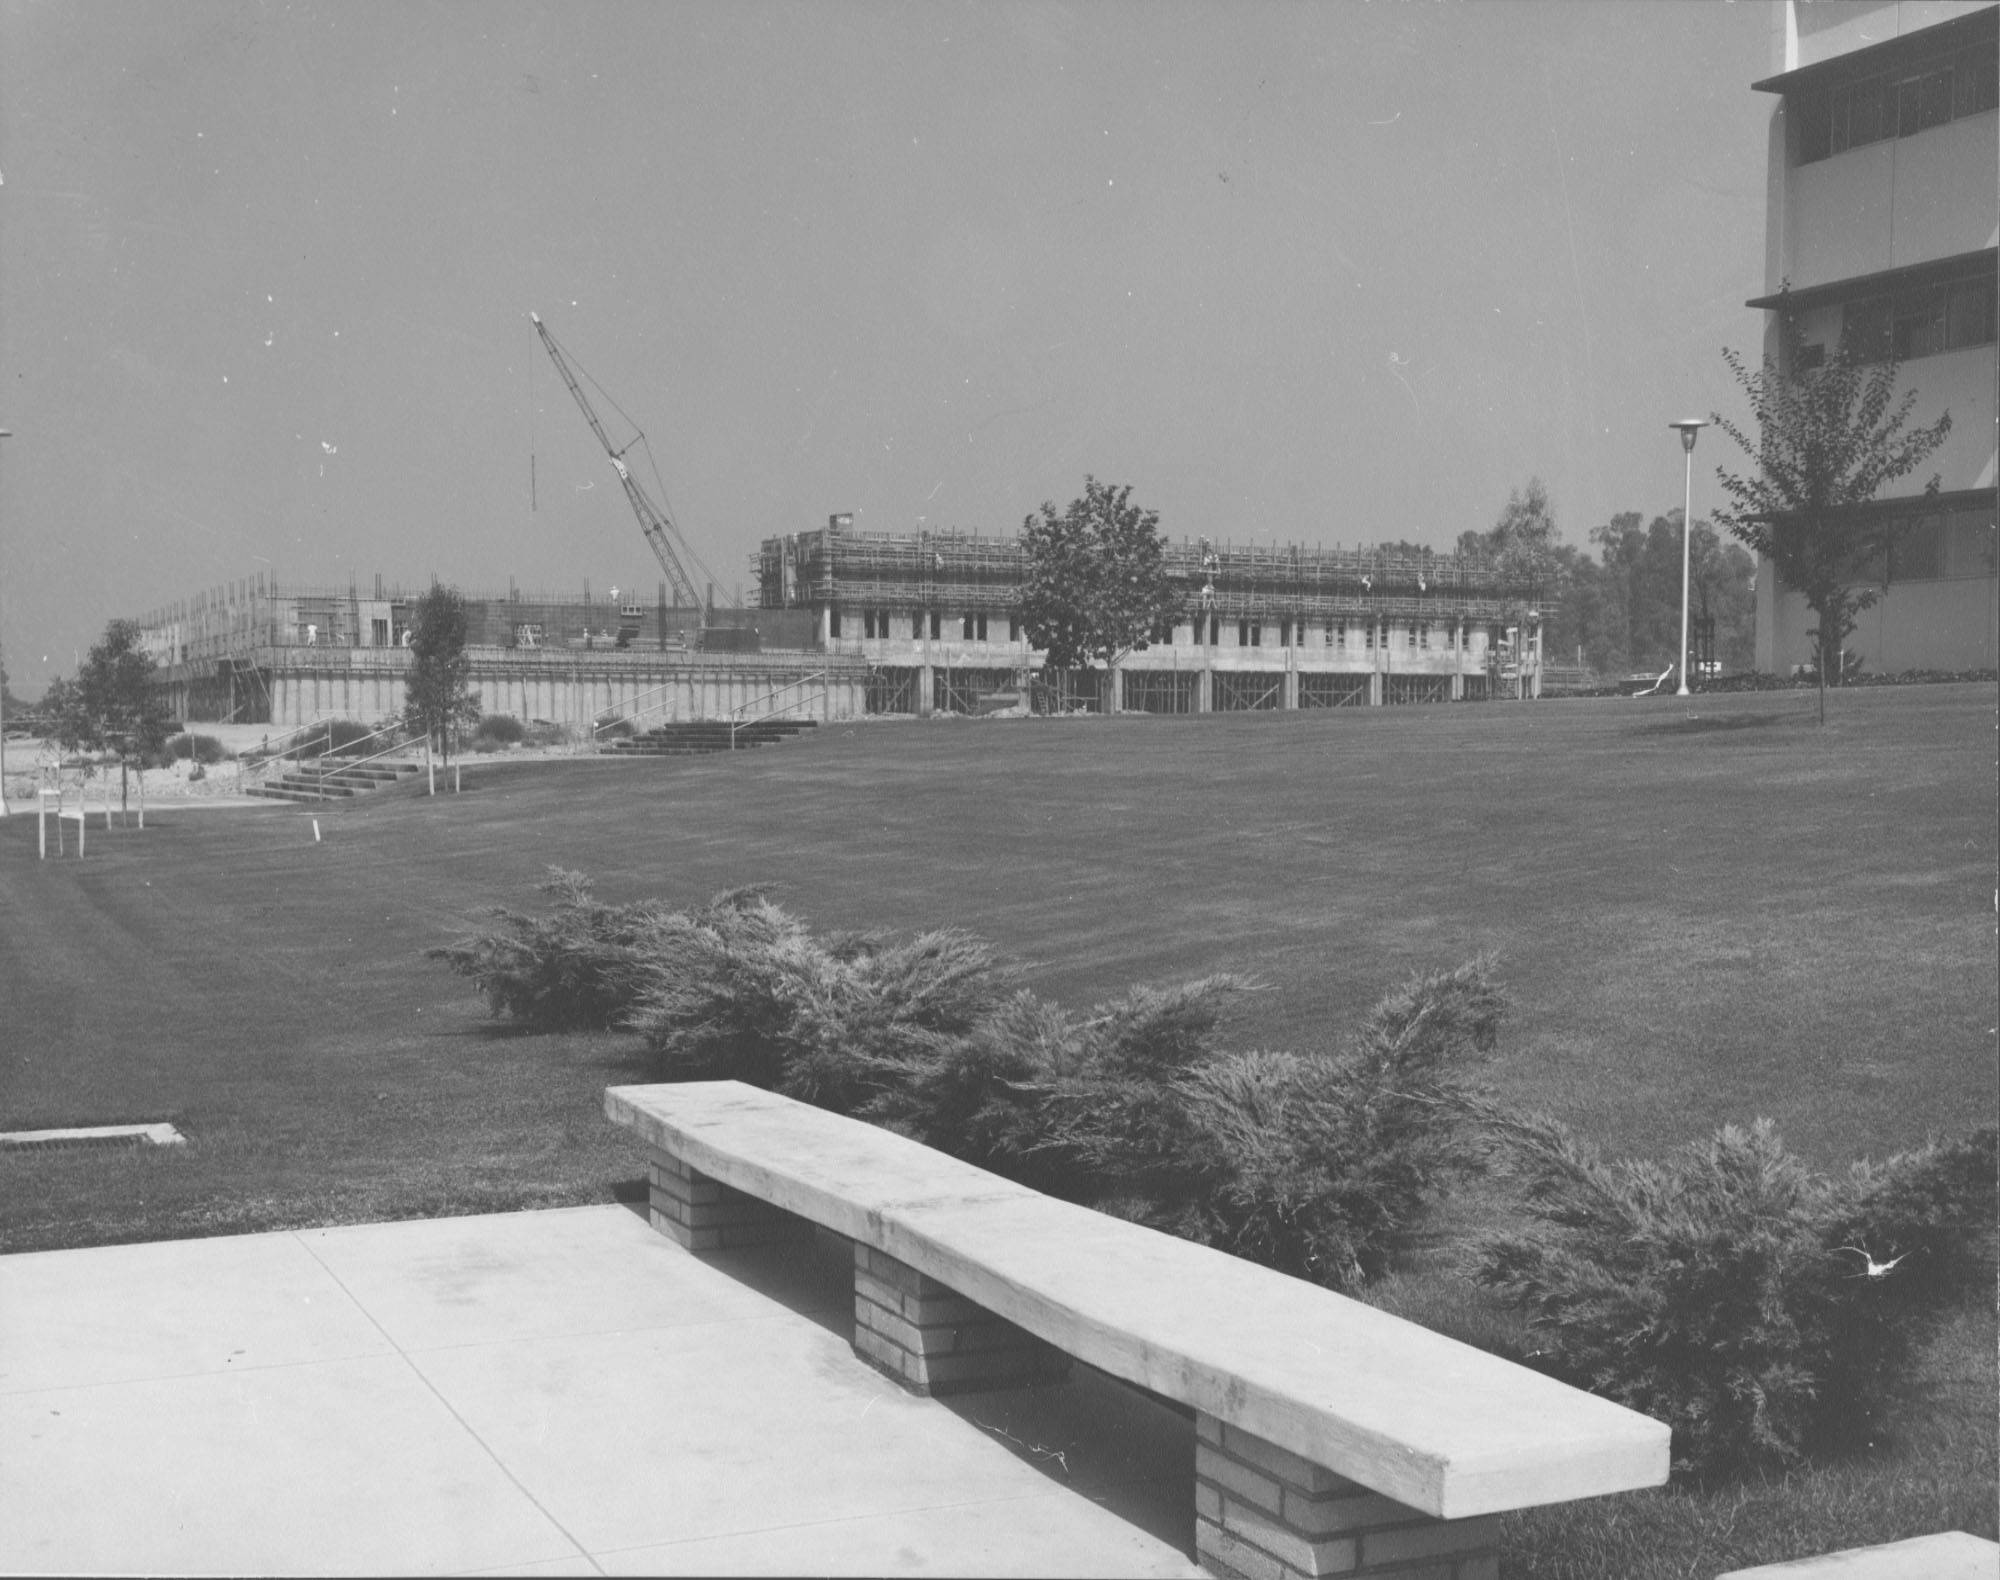 Construction work of the Sierra Complex at CSUN